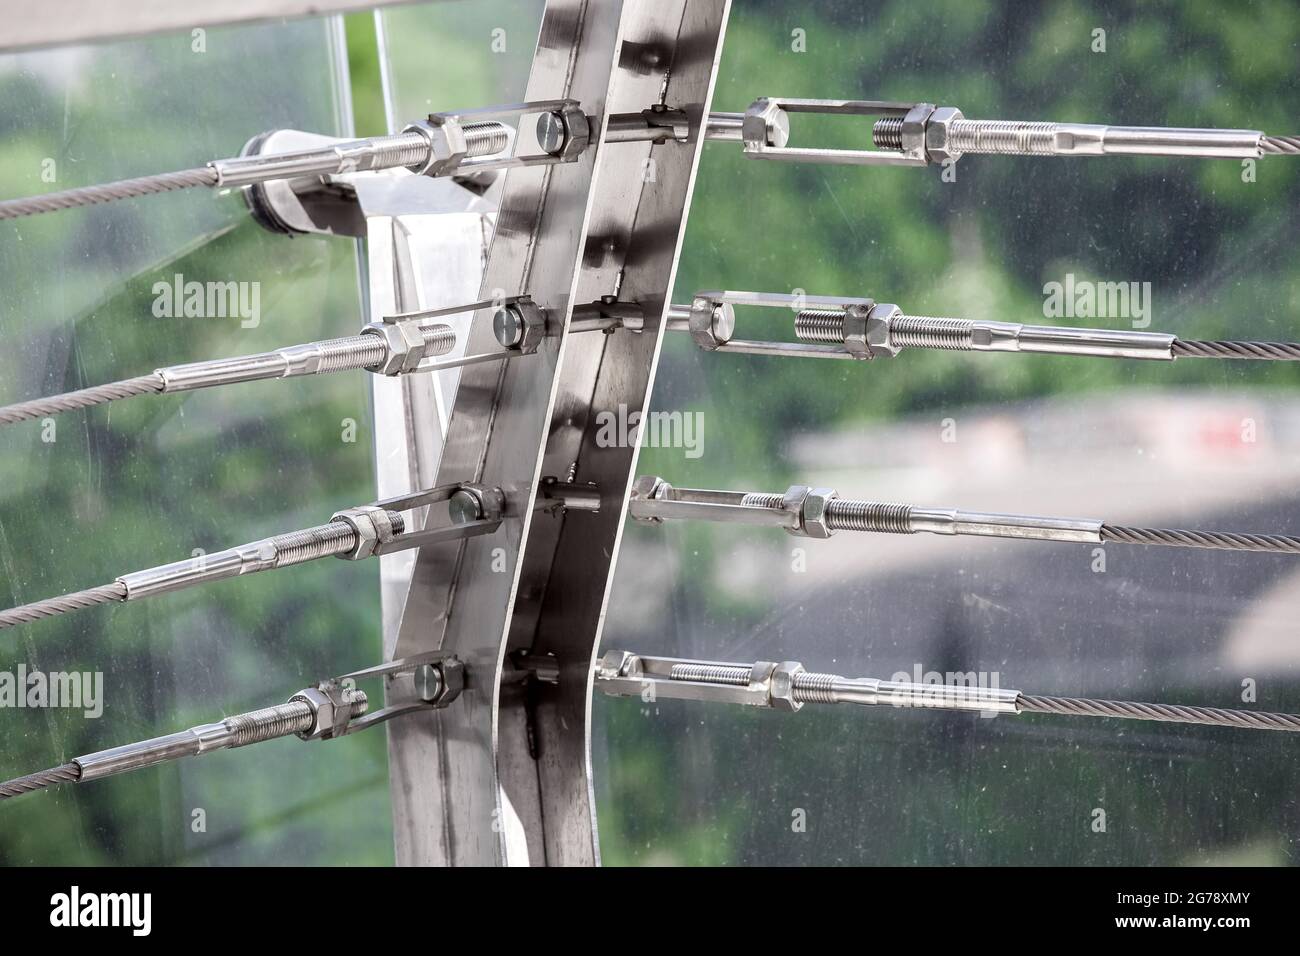 A close up view of tension steel cables with steel fasteners, a detail of frame on glass bridge with fastening engineering construction stainless stee Stock Photo